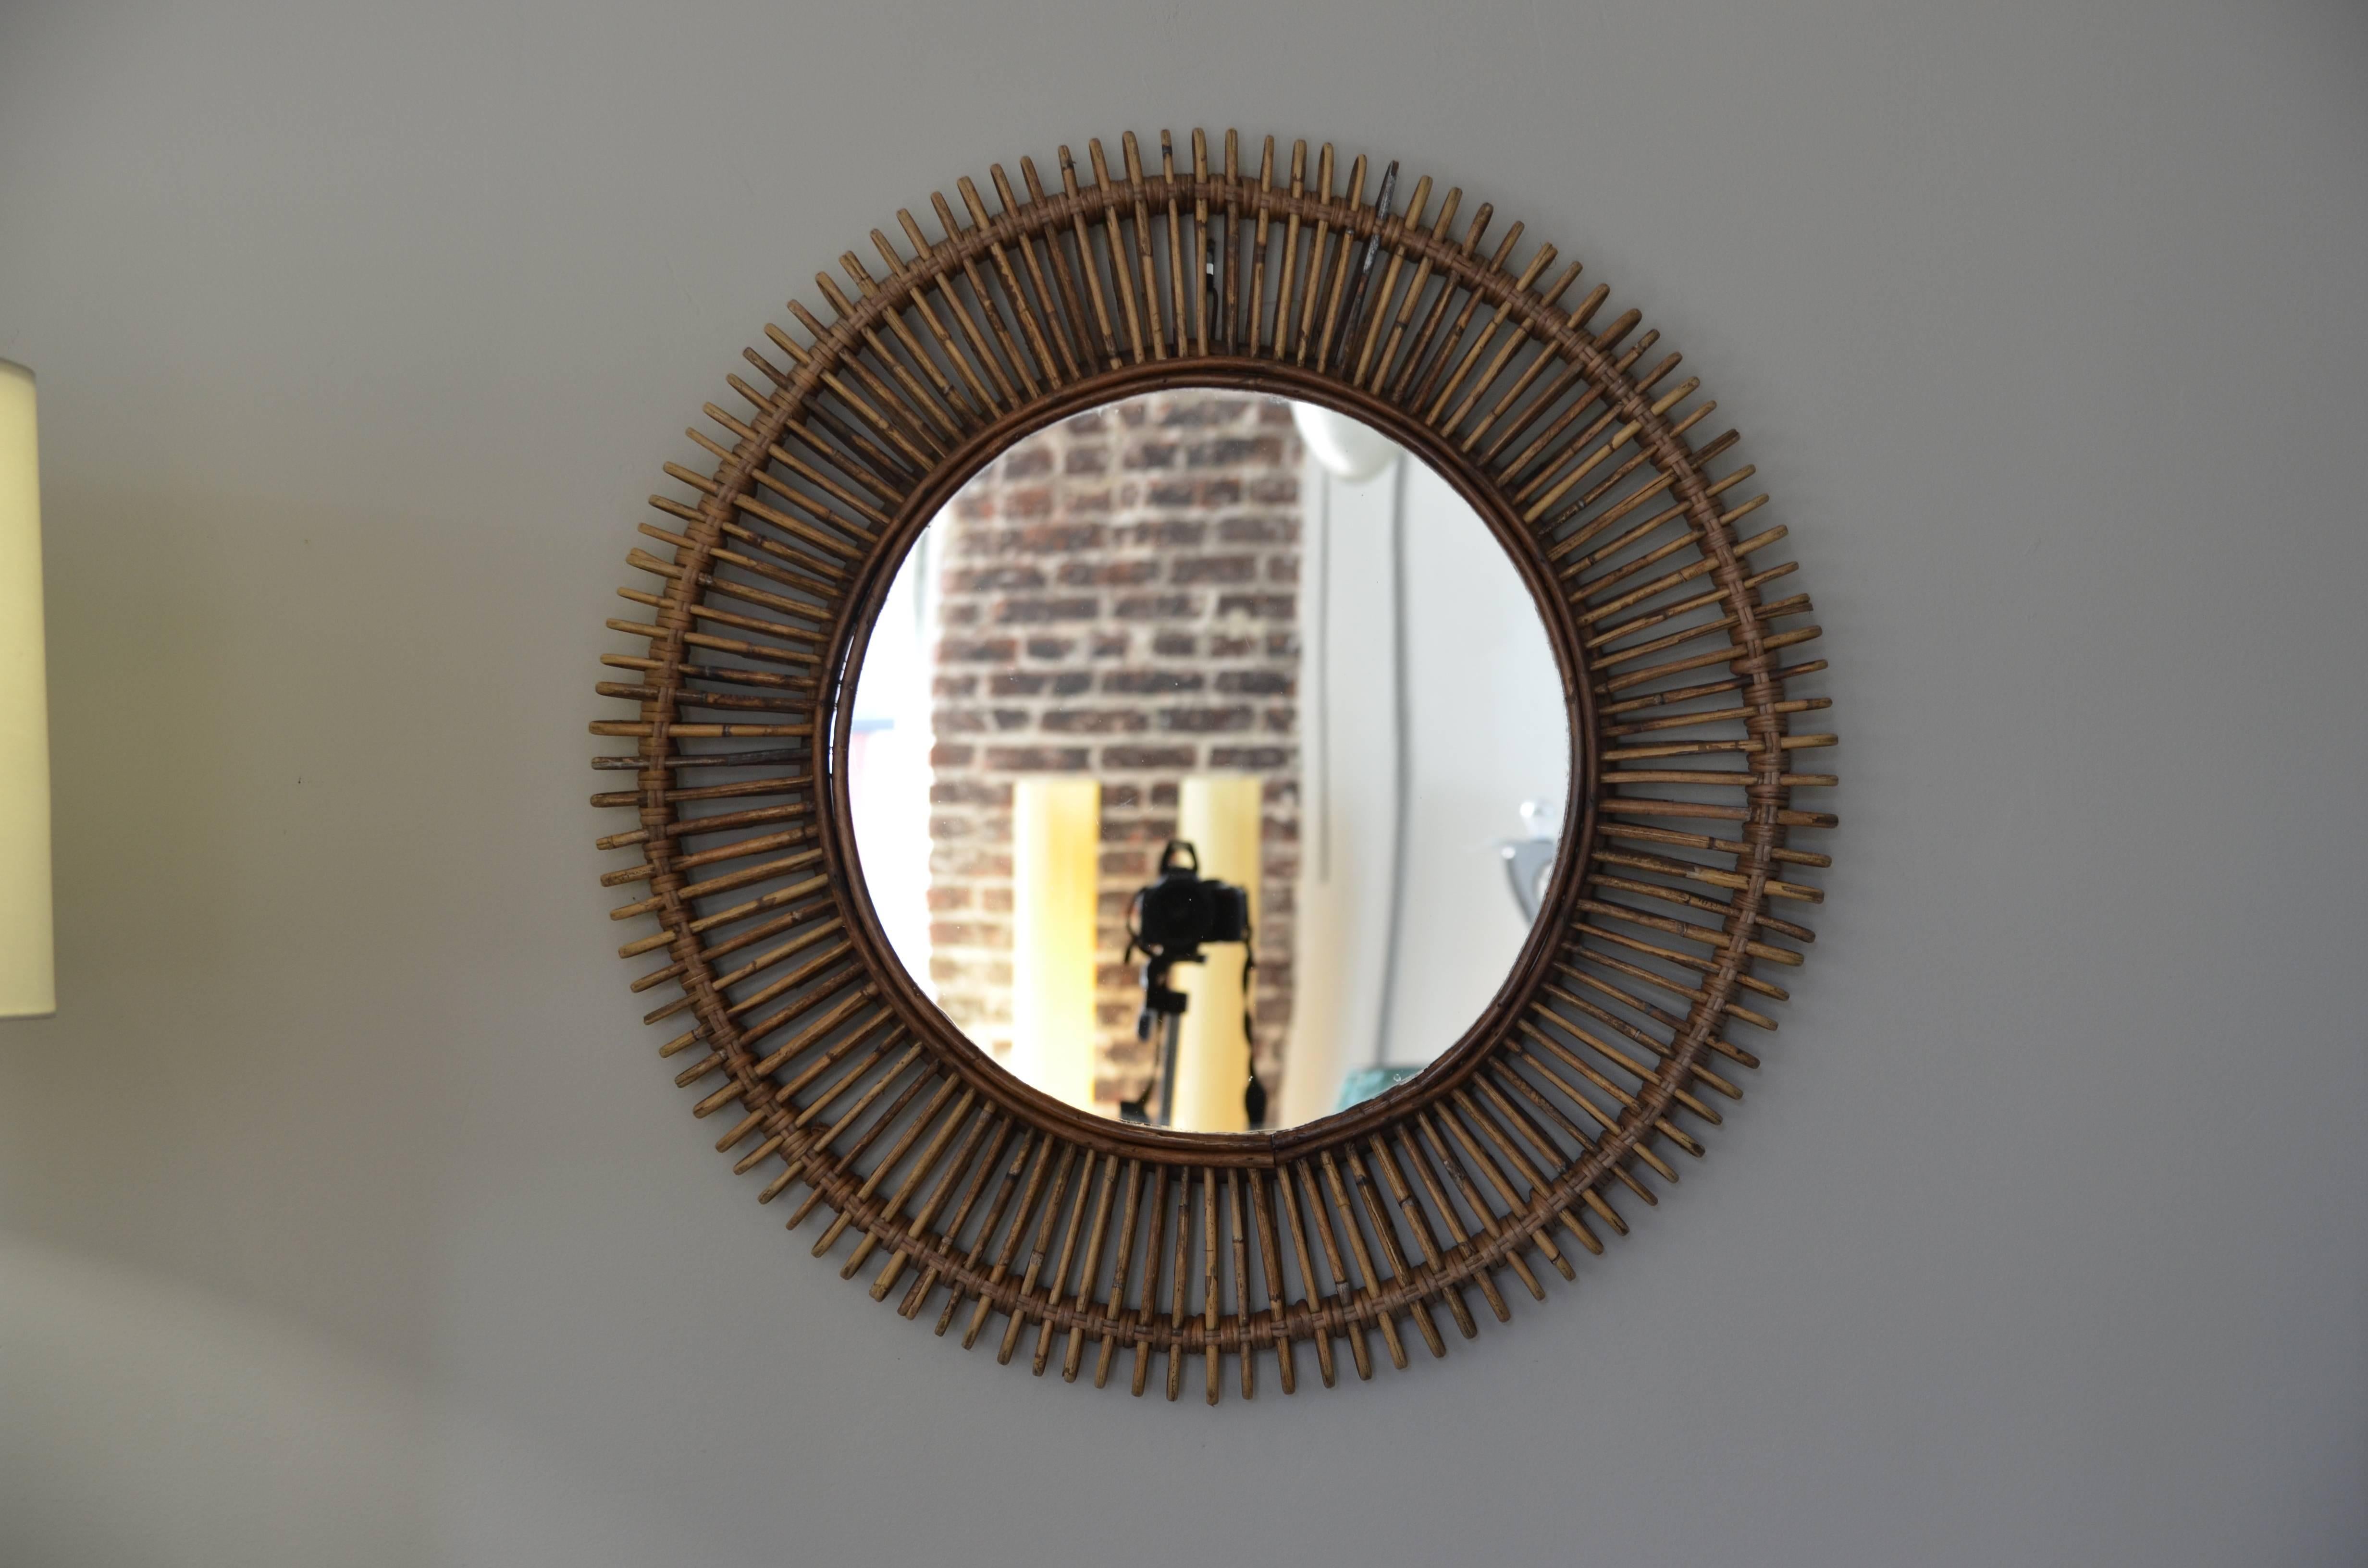 Pair of 'Oculus' round rattan mirrors by design Frères. Flat mirror inserted into an intricate rattan frame.